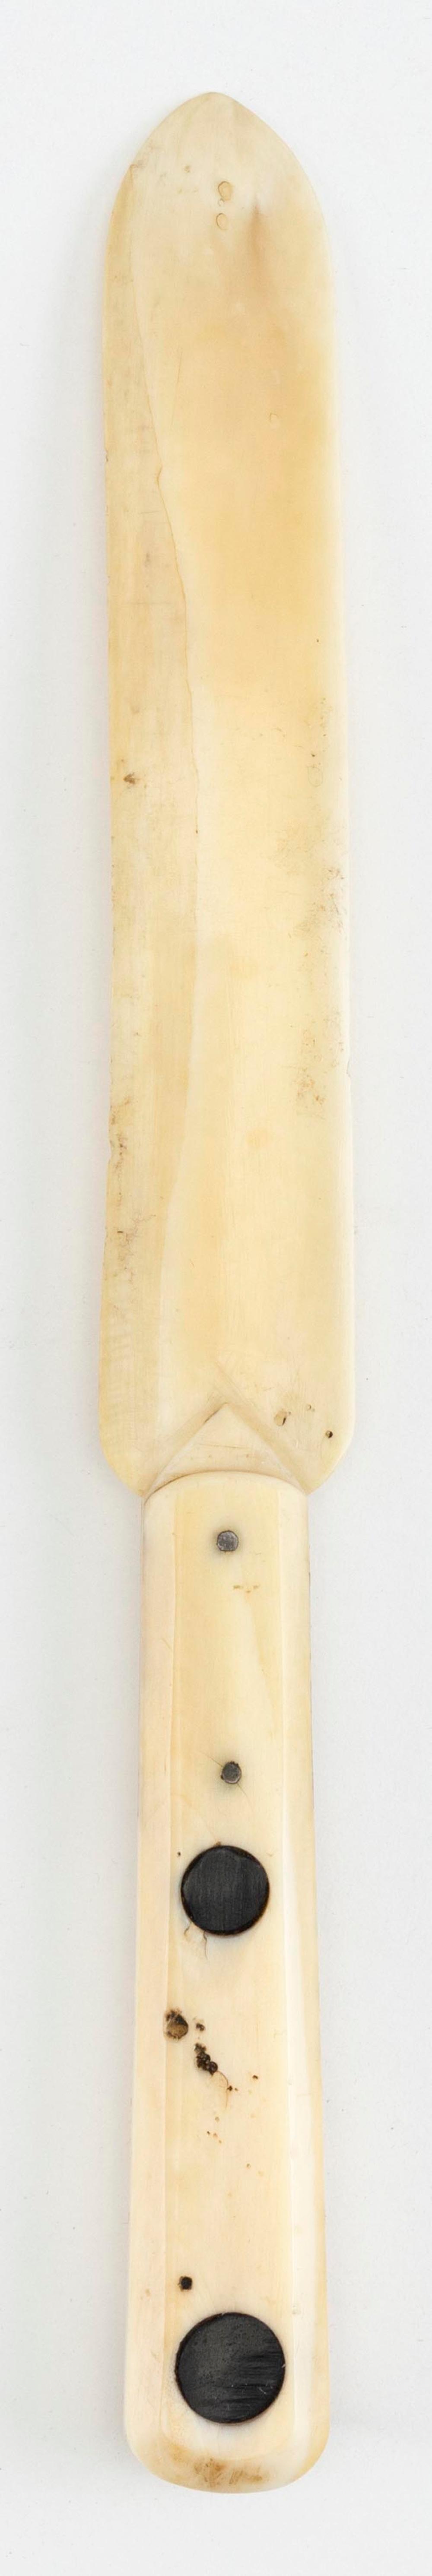 WHALE IVORY KNIFE 19TH CENTURY